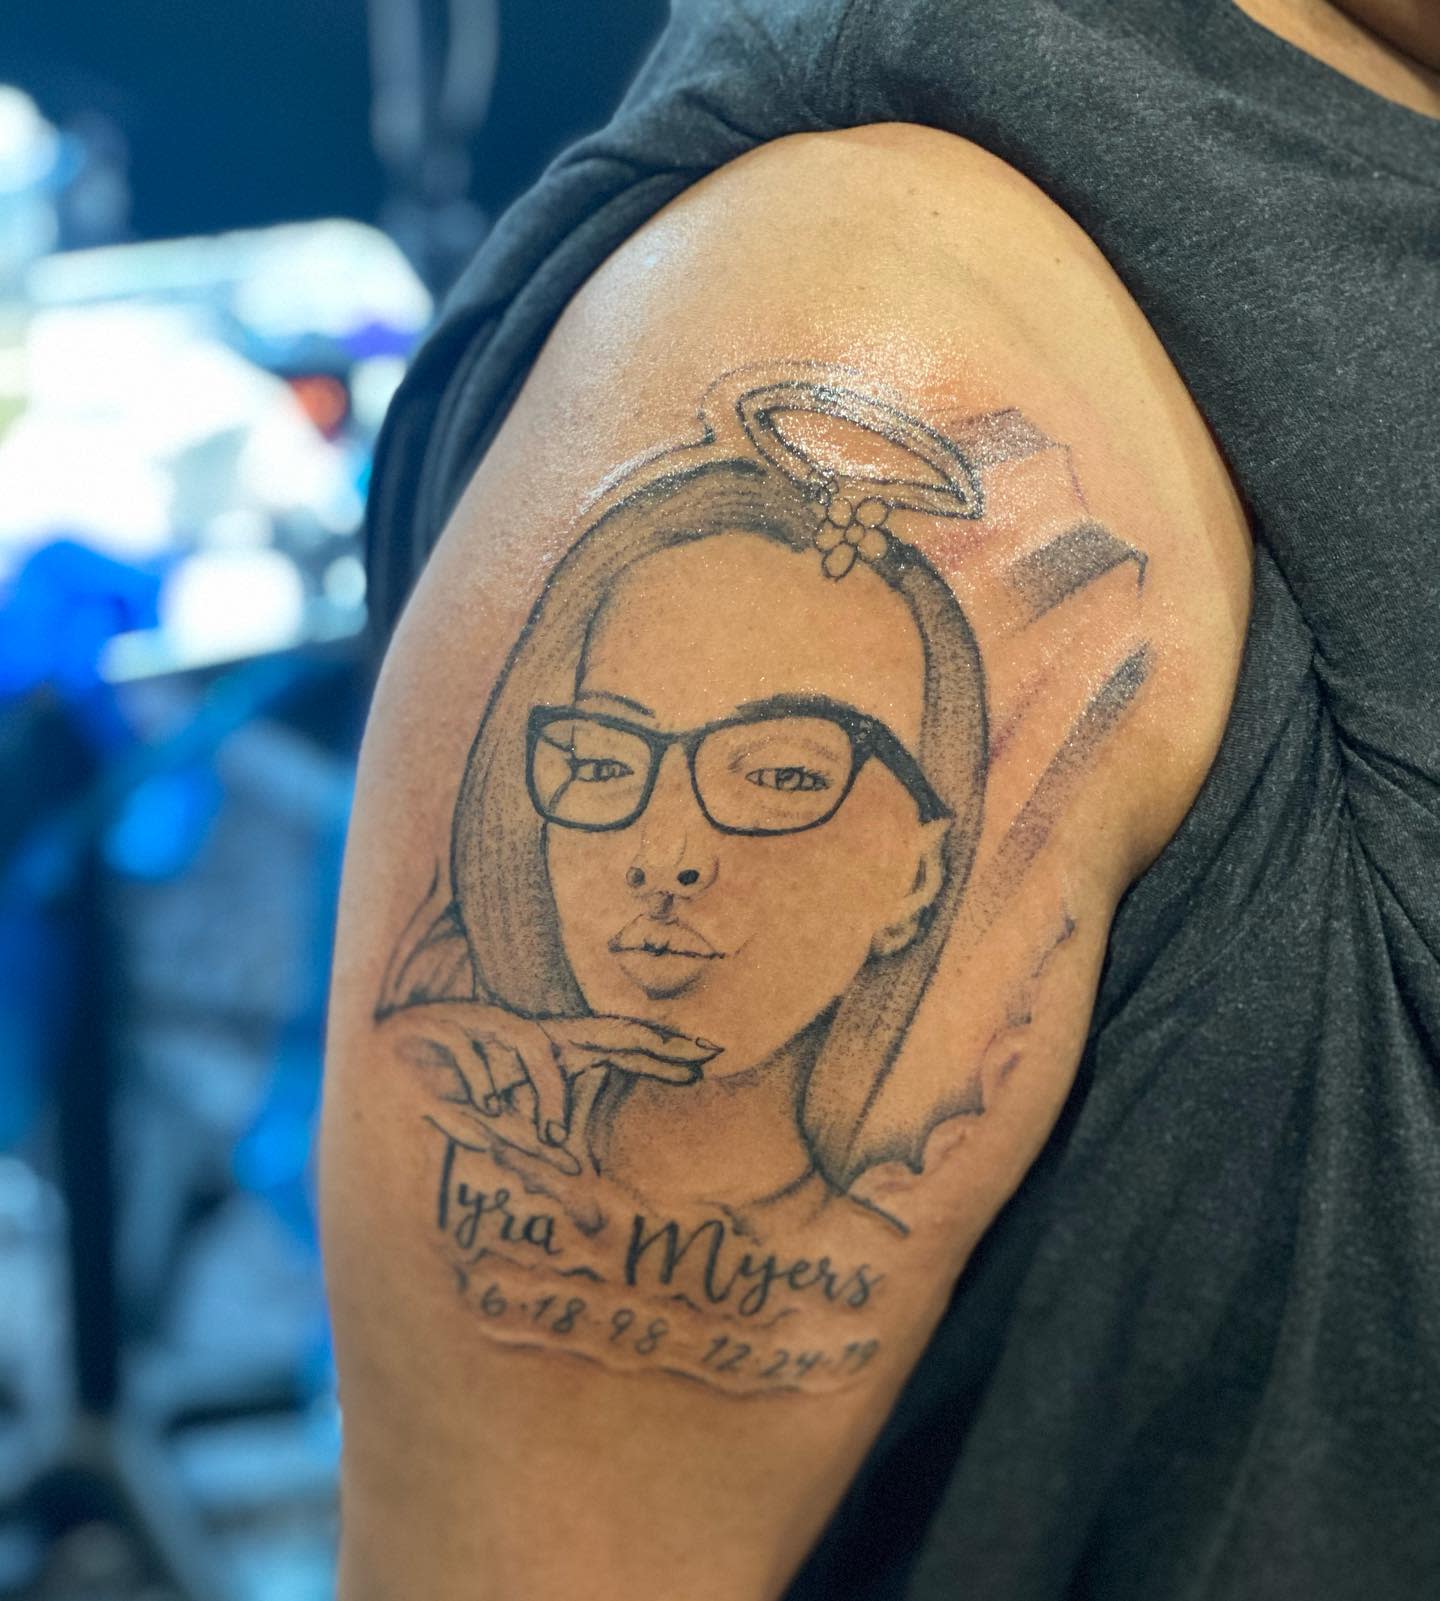 Portrait Tattoos And Designs-Portrait Tattoo Ideas And Meanings - HubPages